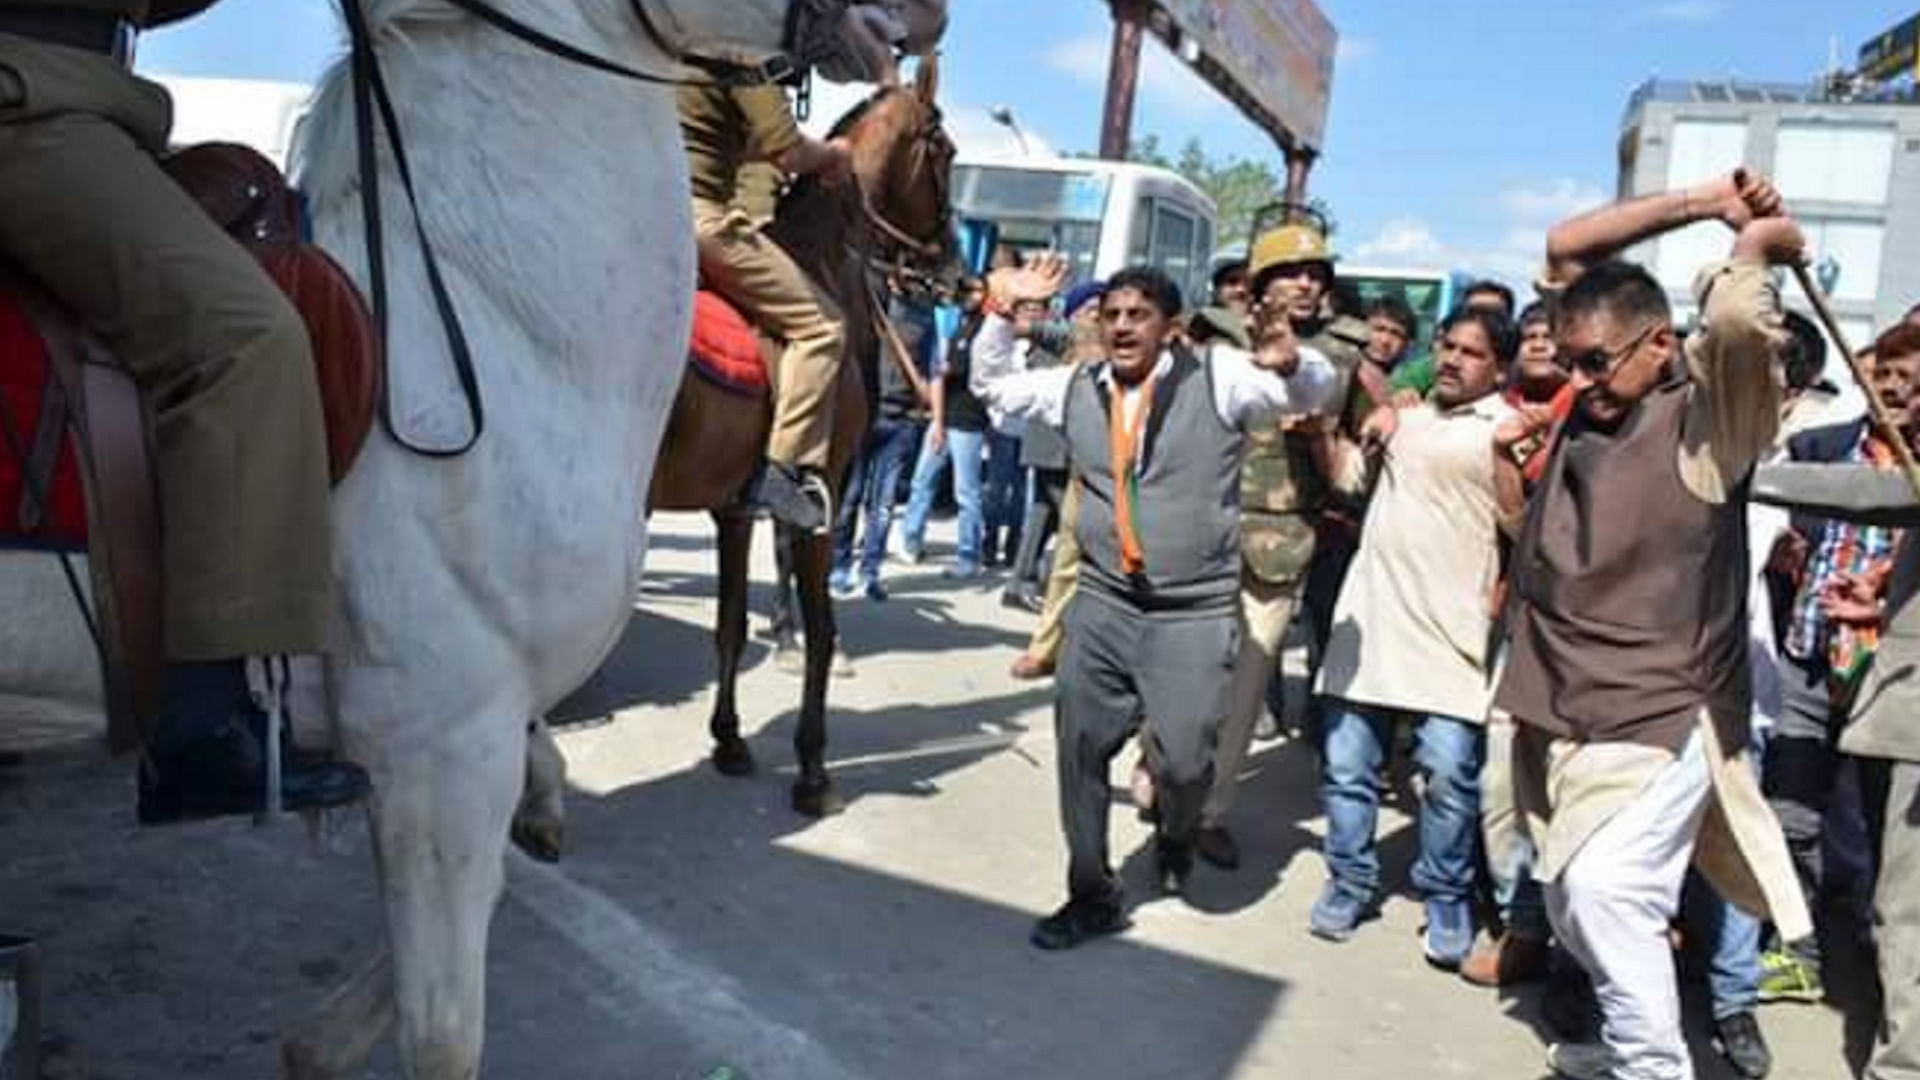 BJP MLA Ganesh Joshi allegedly beating a horse during a protest march in Dehradun. (Photo: ANI screengrab)